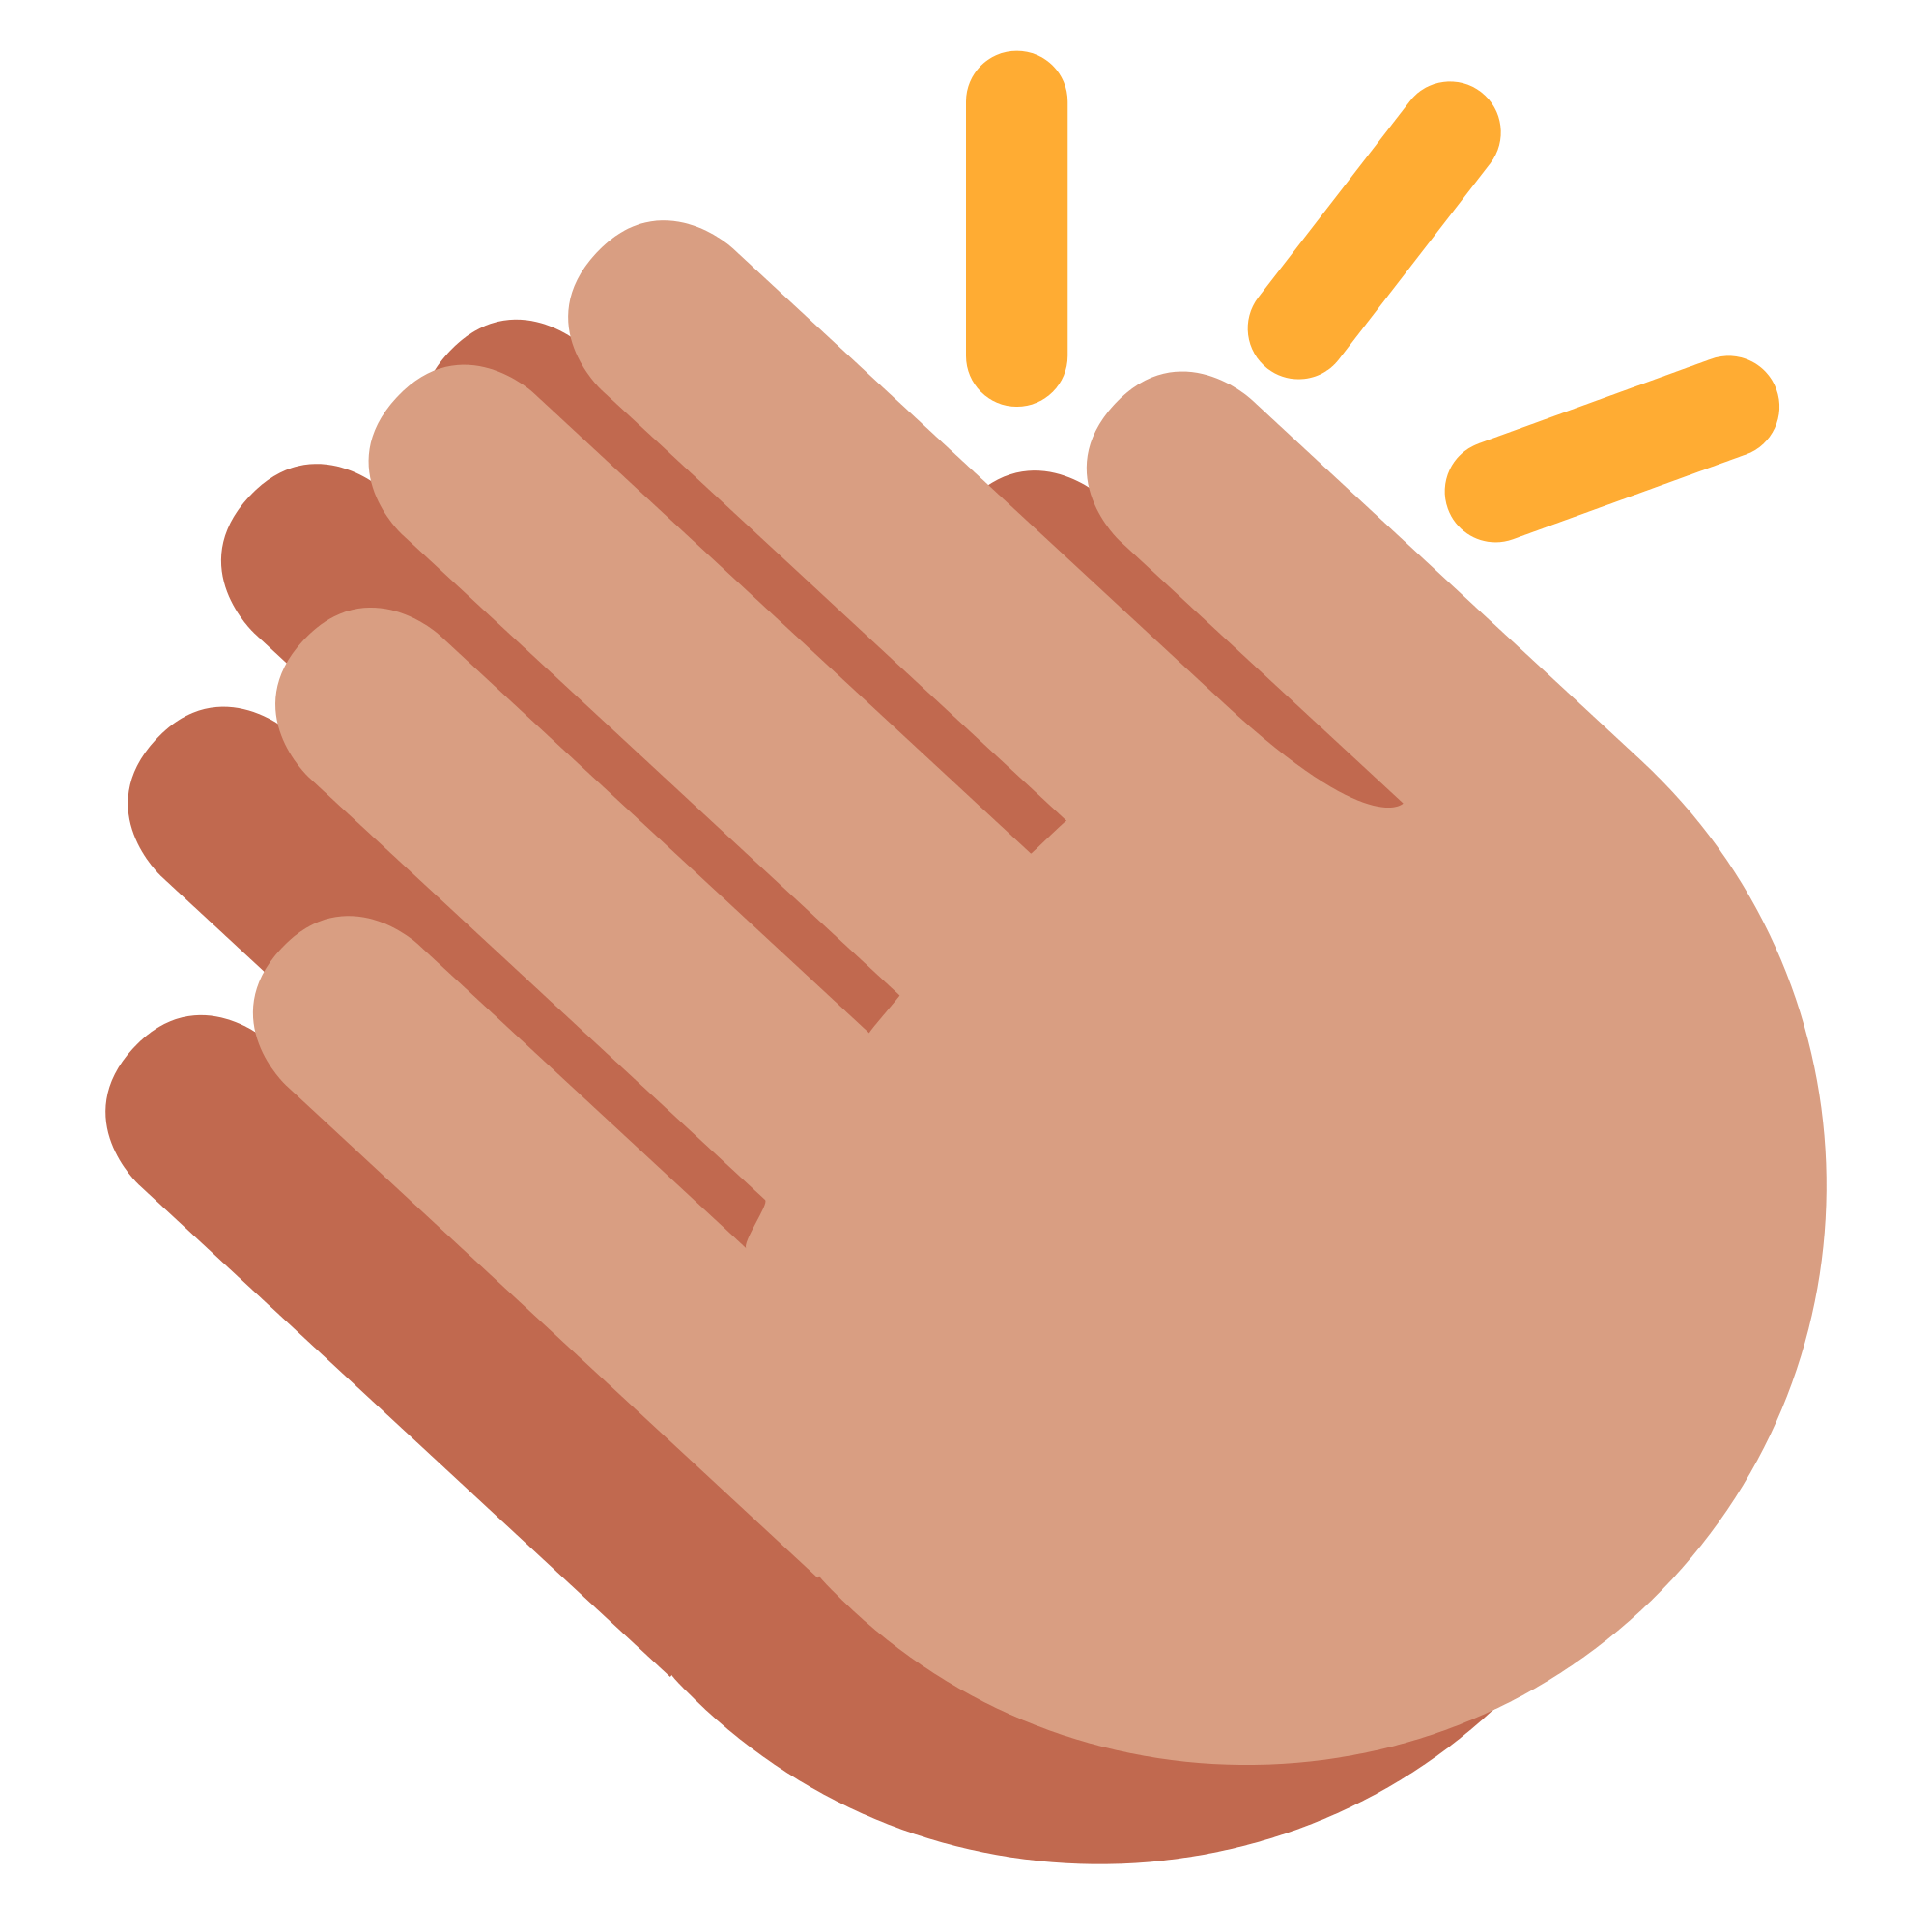 clap clipart uses hand